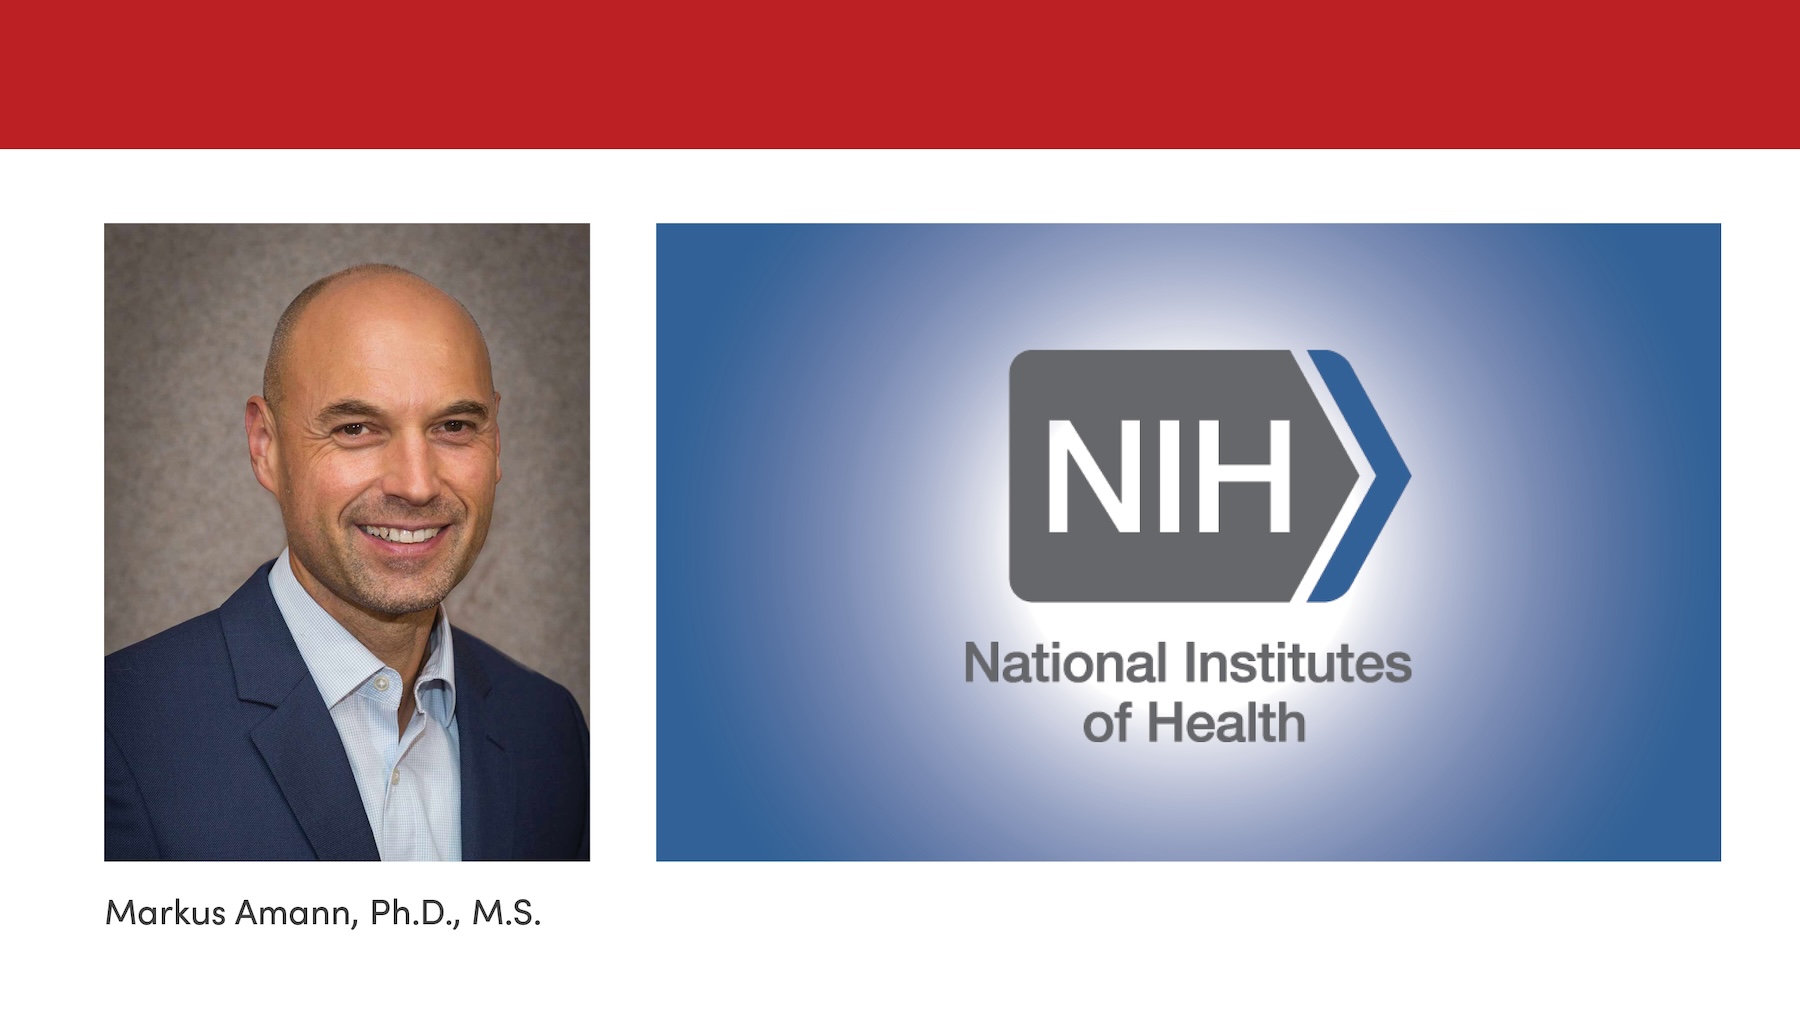 A portrait of Markus Amann next to the National Institute of Health logo.